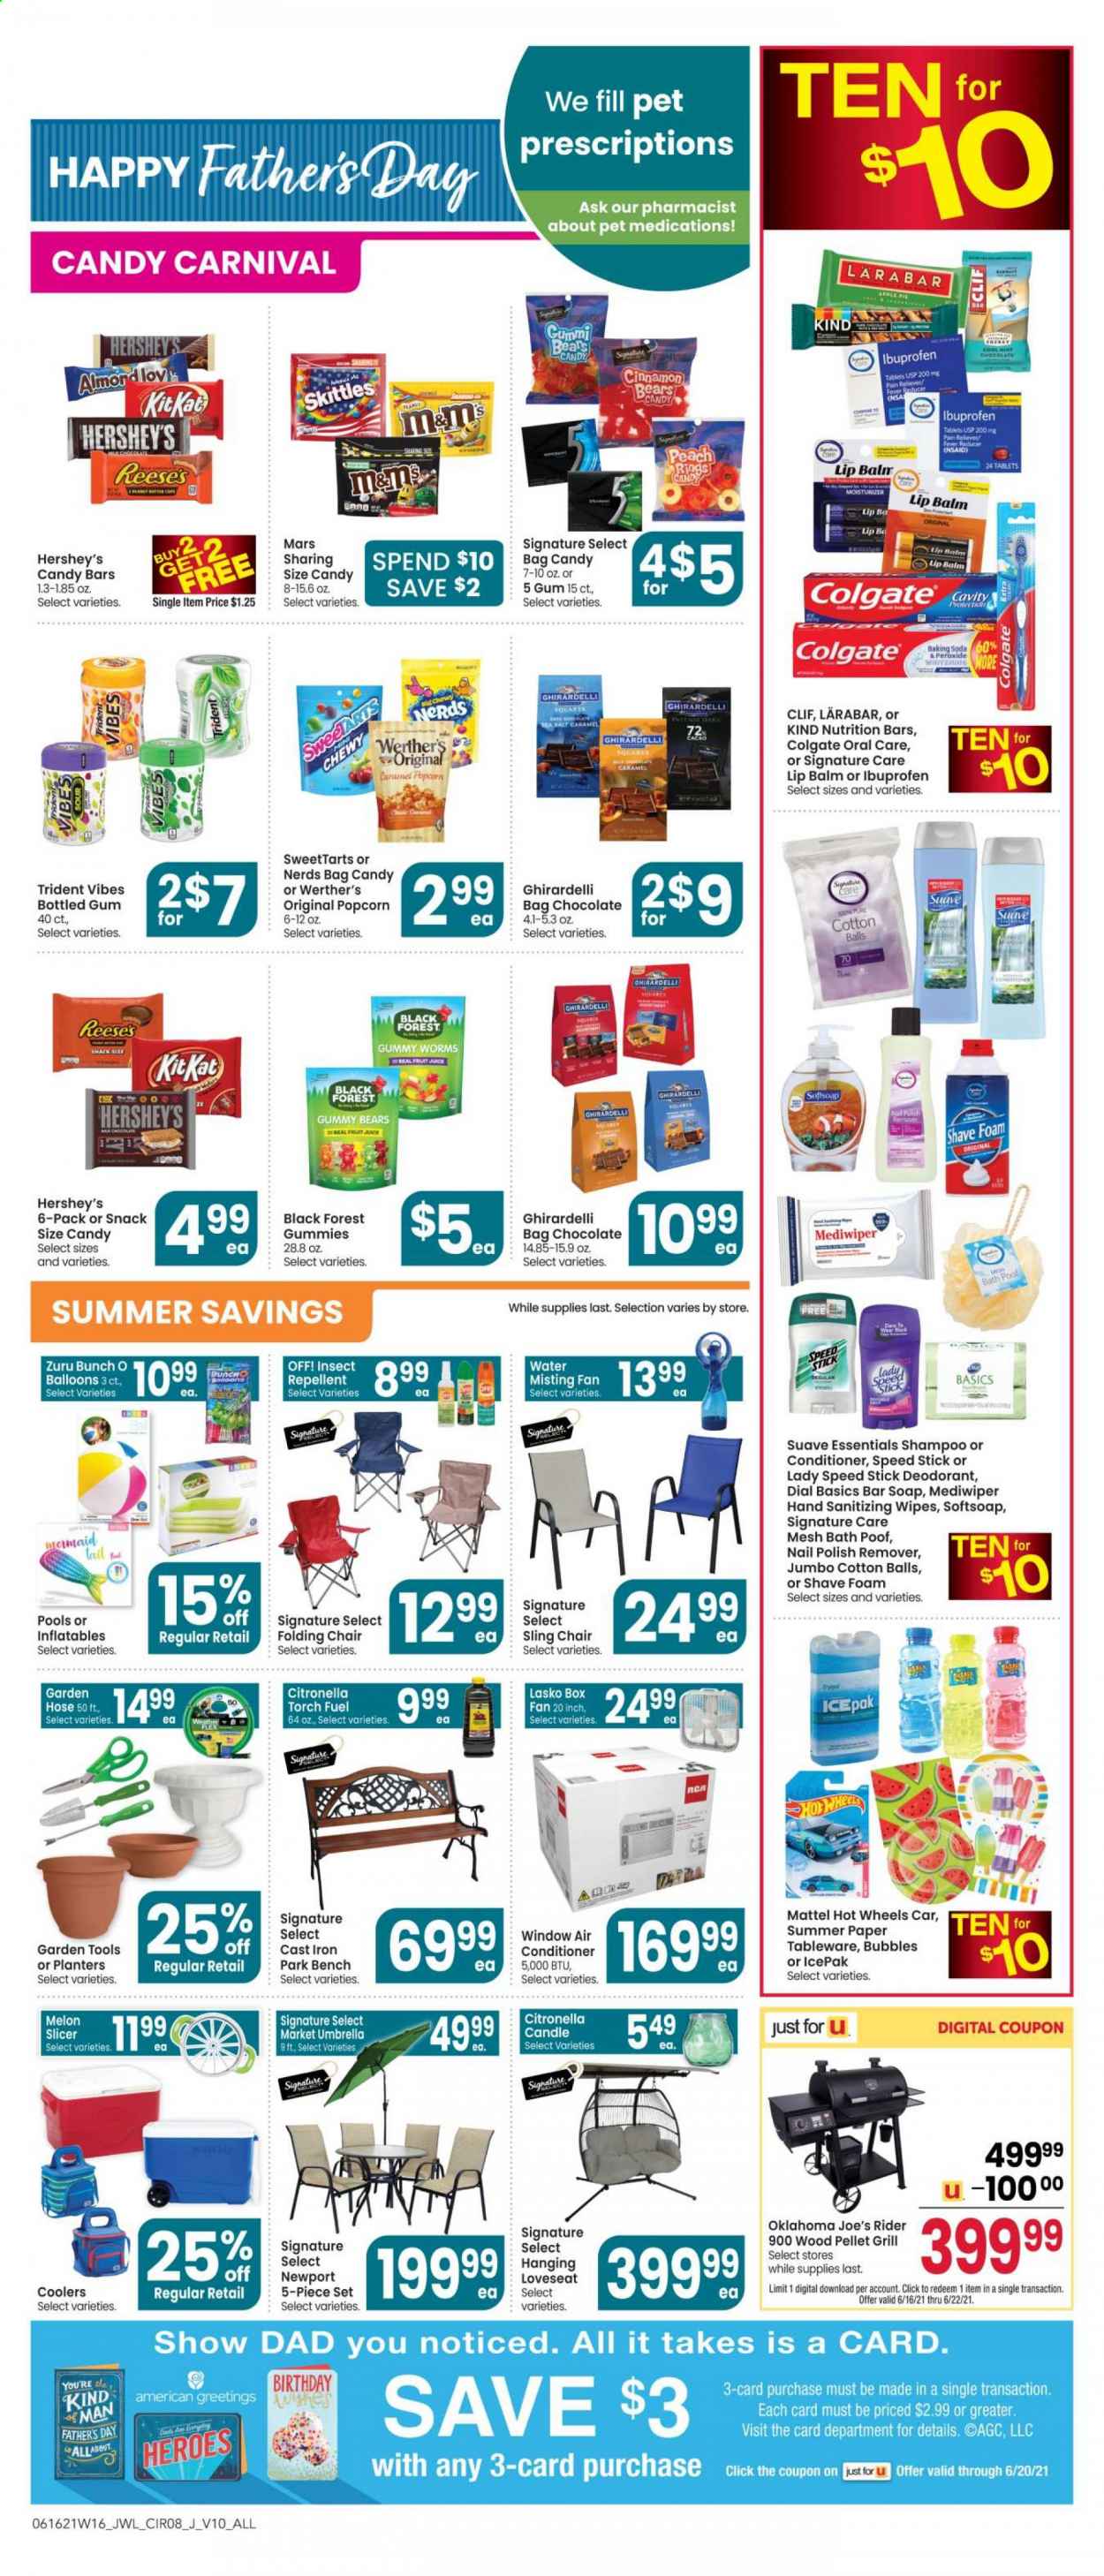 thumbnail - Jewel Osco Flyer - 06/16/2021 - 06/22/2021 - Sales products - milk, Reese's, Hershey's, chocolate, Mars, M&M's, Skittles, Trident, Ghirardelli, popcorn, bicarbonate of soda, salt, nutrition bar, cinnamon, Planters, juice, fruit juice, wipes, cotton balls, antiseptic wipes, shampoo, Softsoap, Suave, soap bar, Dial, soap, Colgate, lip balm, moisturizer, conditioner, anti-perspirant, Speed Stick, deodorant, repellent, nail polish remover, tableware, slicer, paper, balloons, candle, garden hose, Ibuprofen, melons. Page 8.